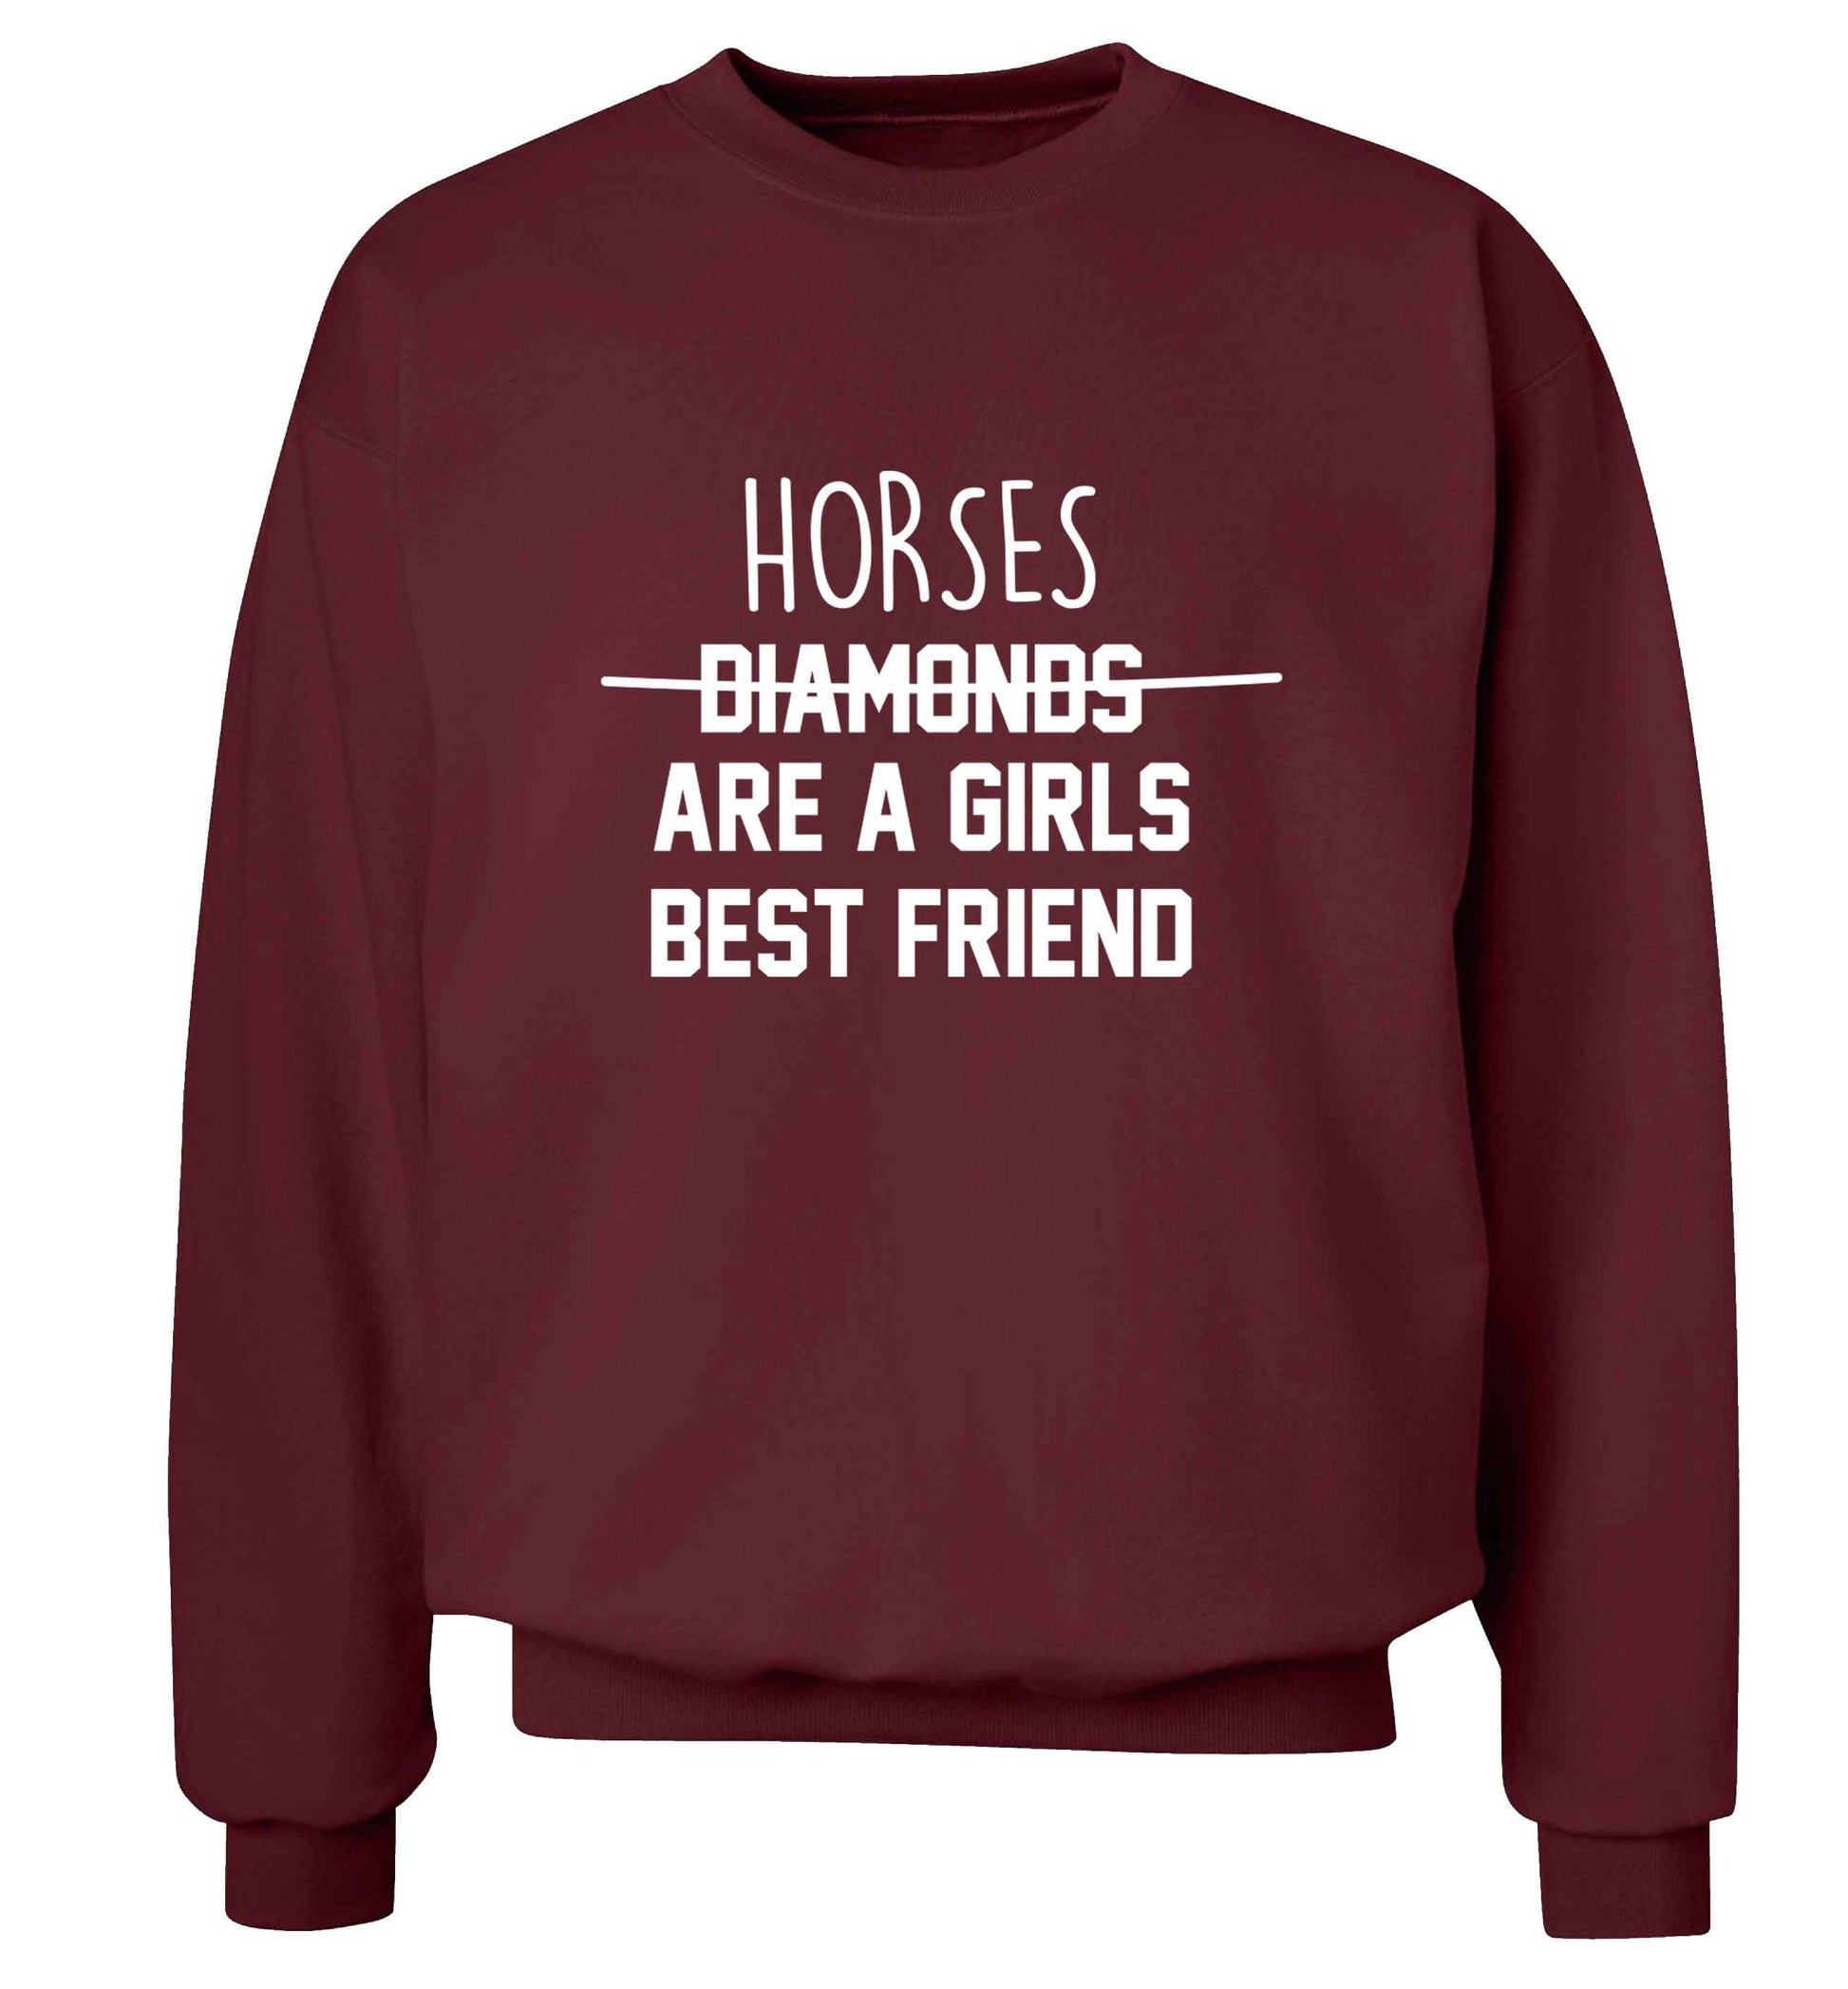 Horses are a girls best friend adult's unisex maroon sweater 2XL